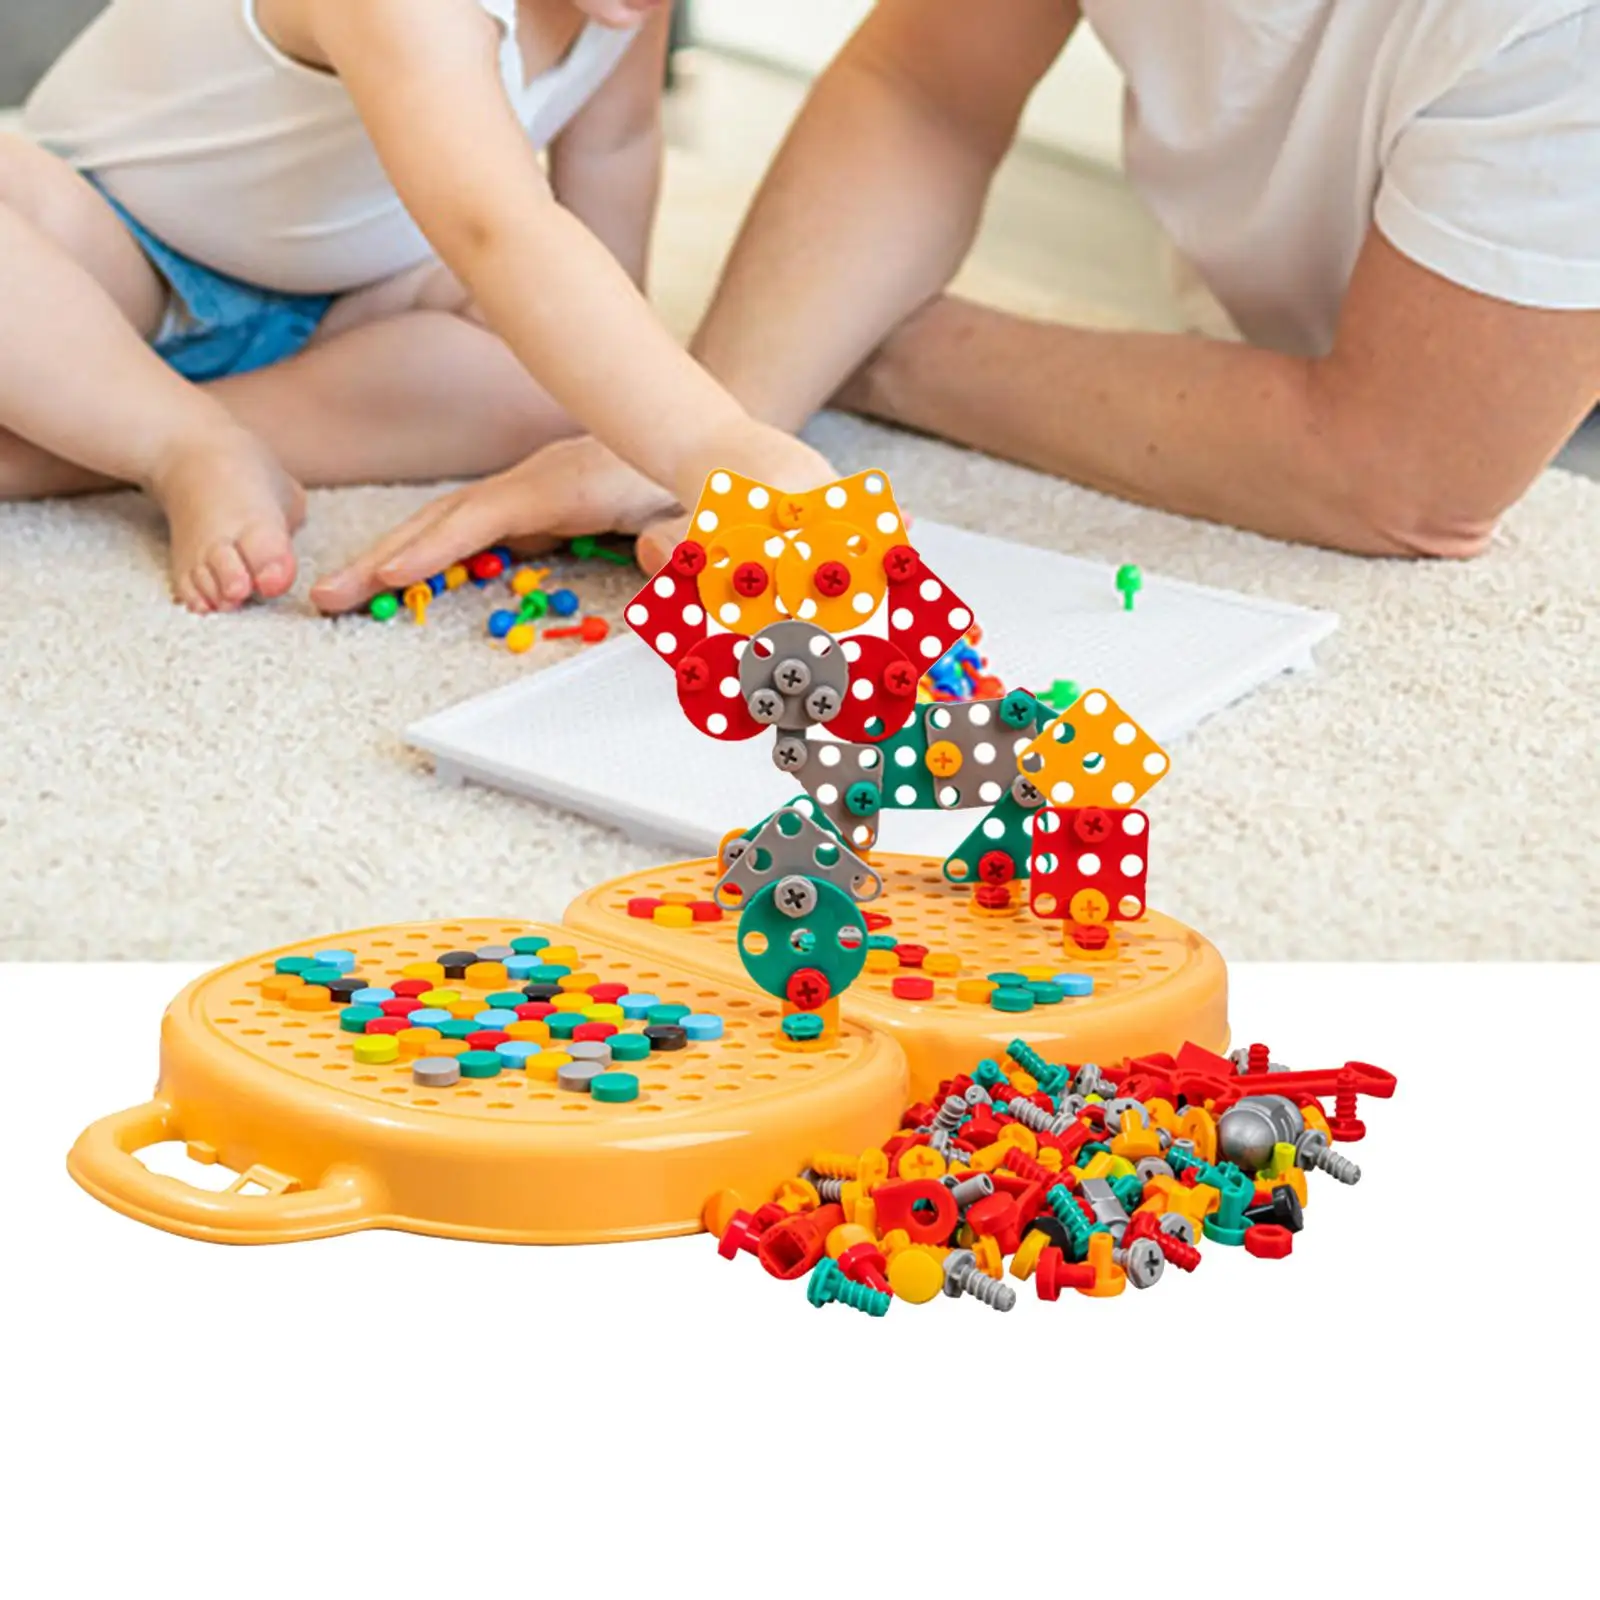 Simulation Building Toys Puzzle Toys Building Bricks Game Set Game Activities Center Construction Enginee for Children